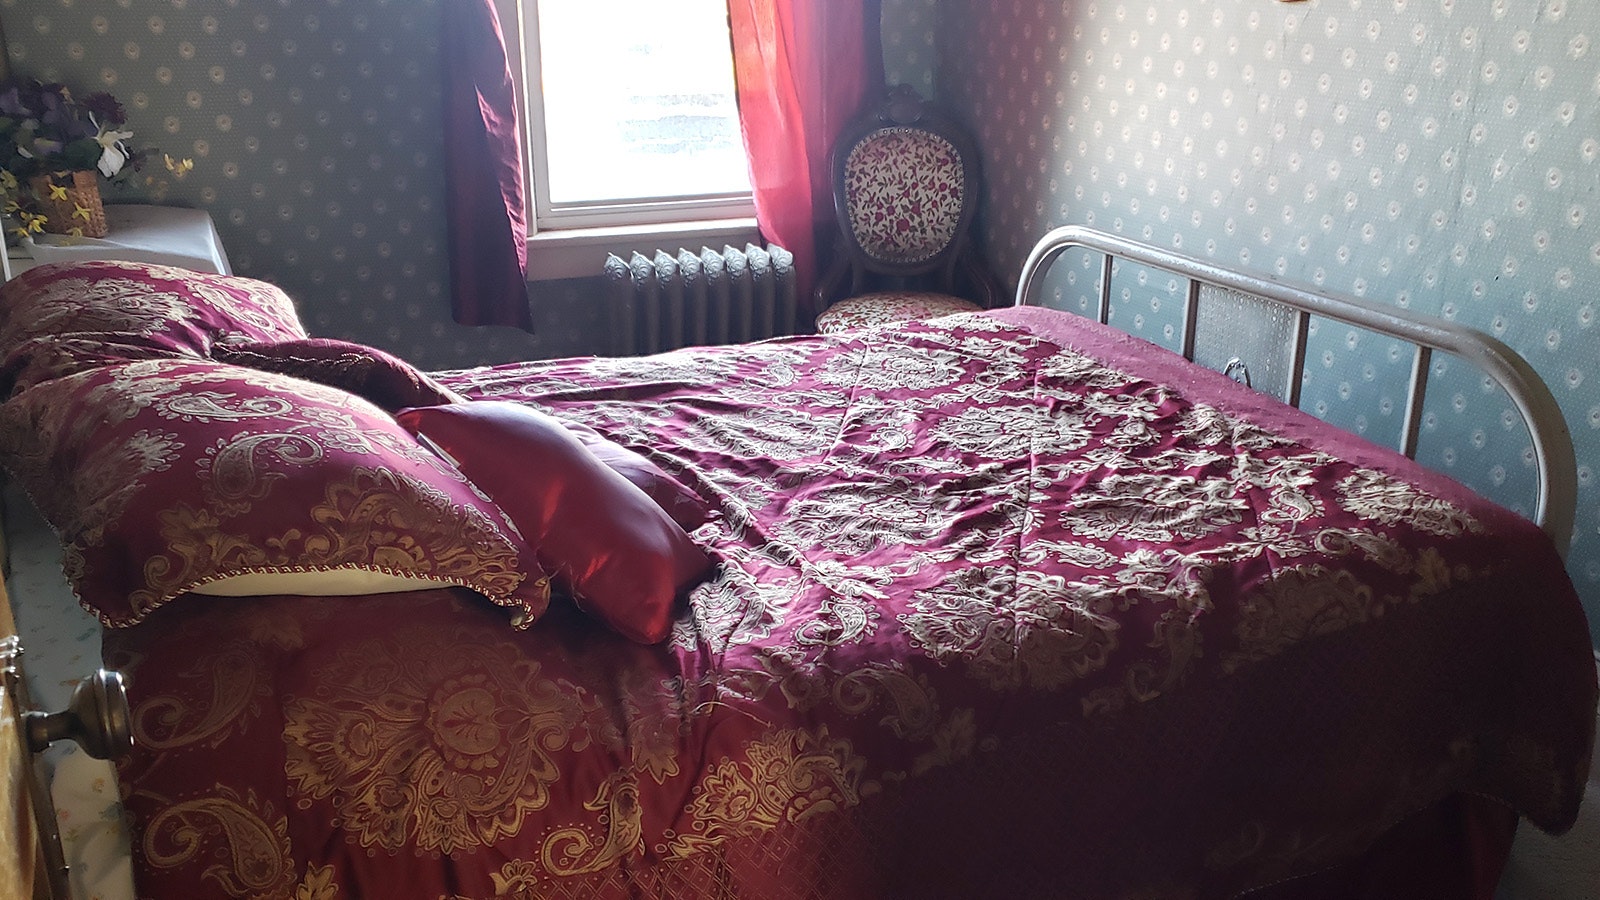 A charming room heated with an old-fashioned radiator in The Virginian.